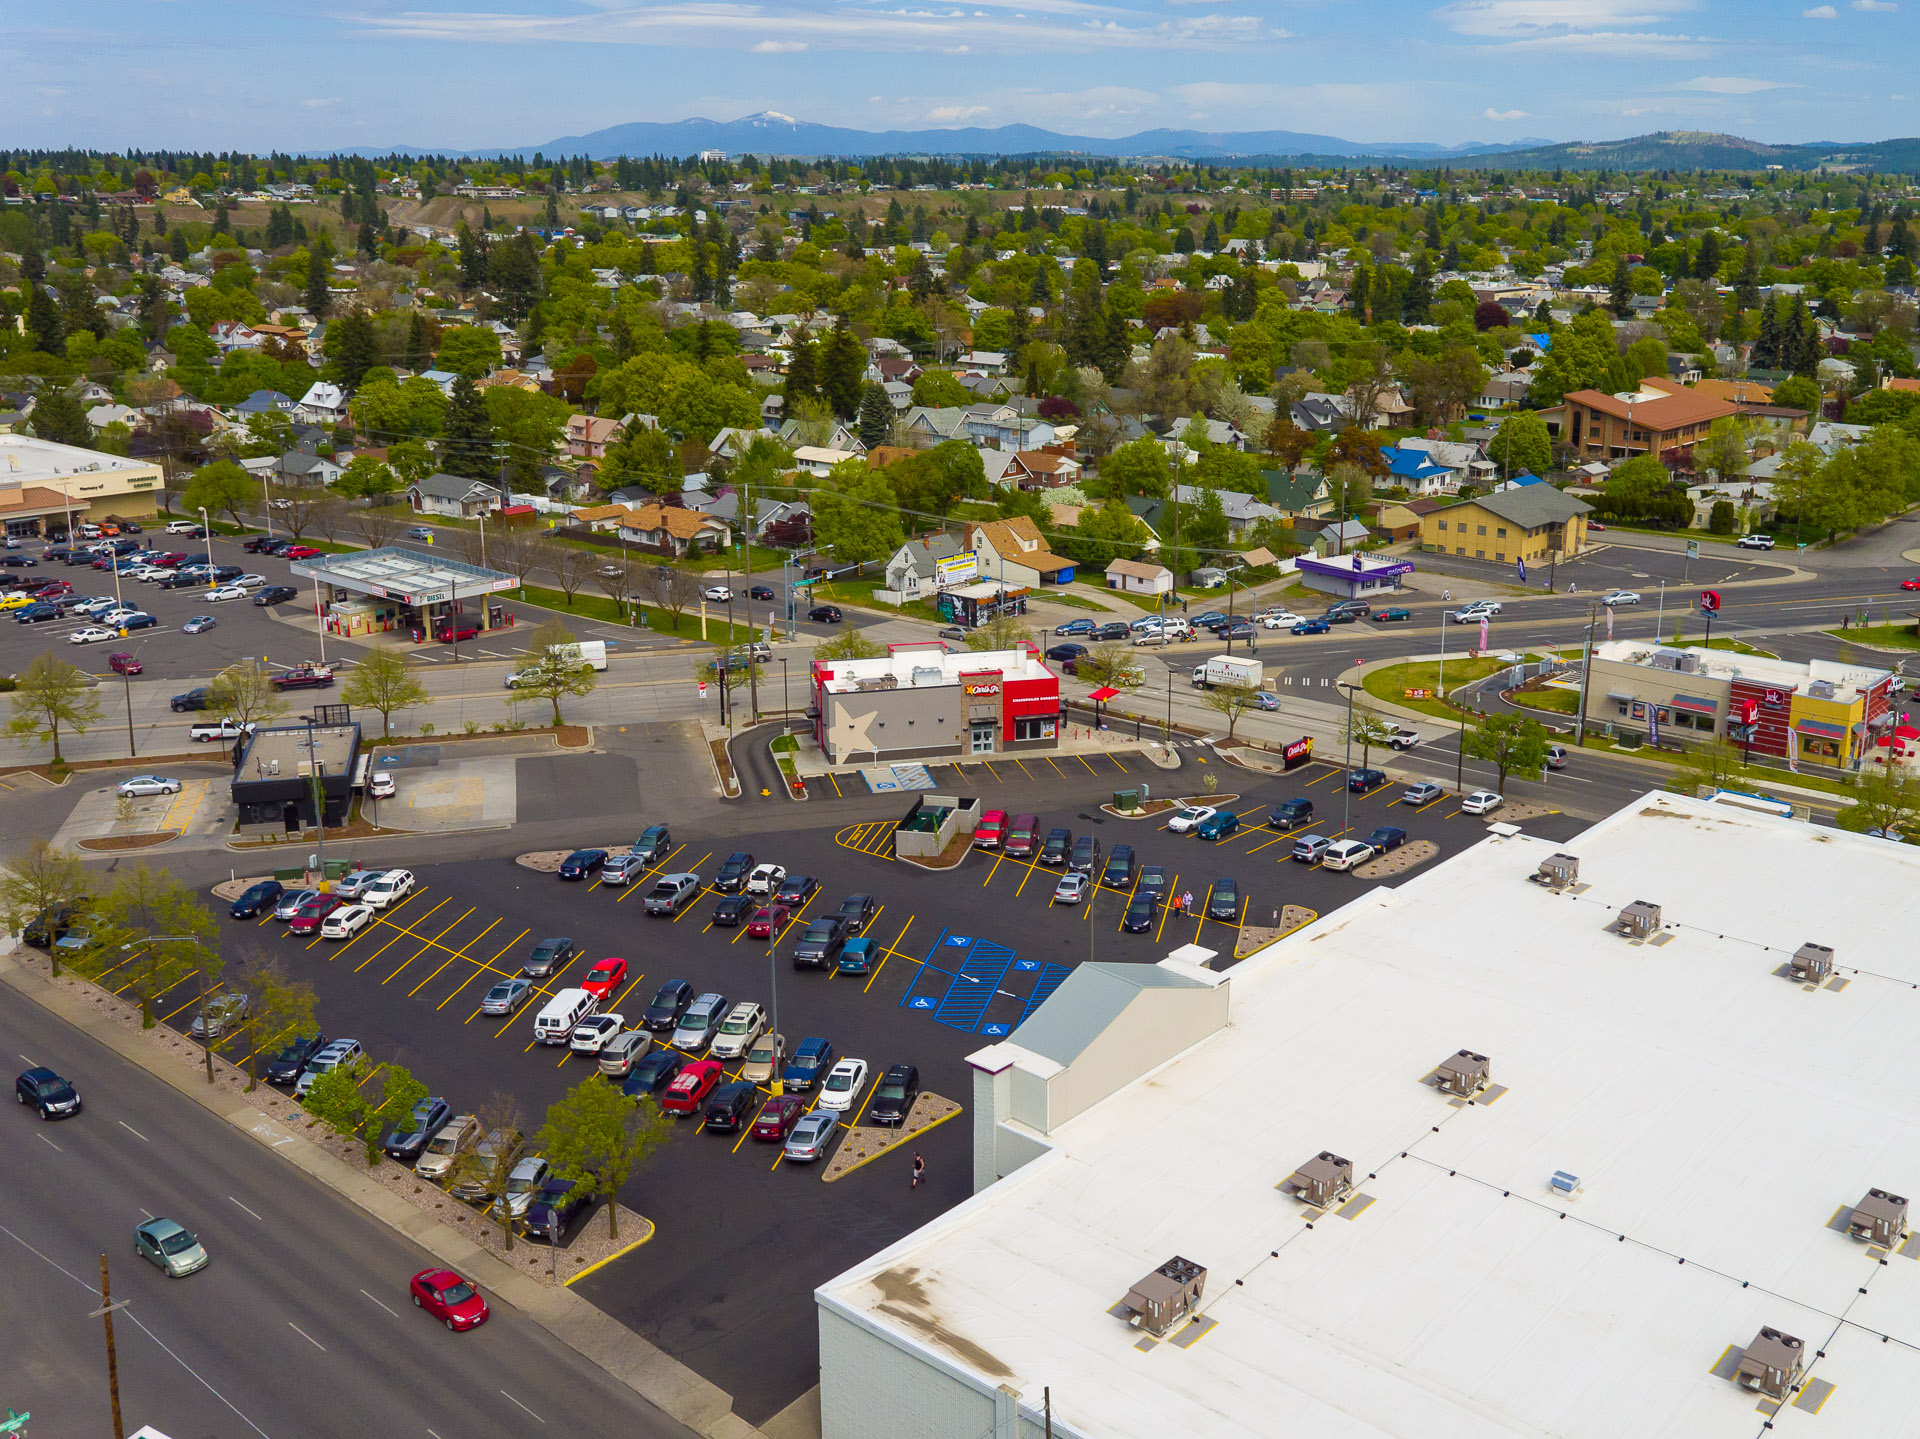 Commercial Drone Photography at Planet Fitness